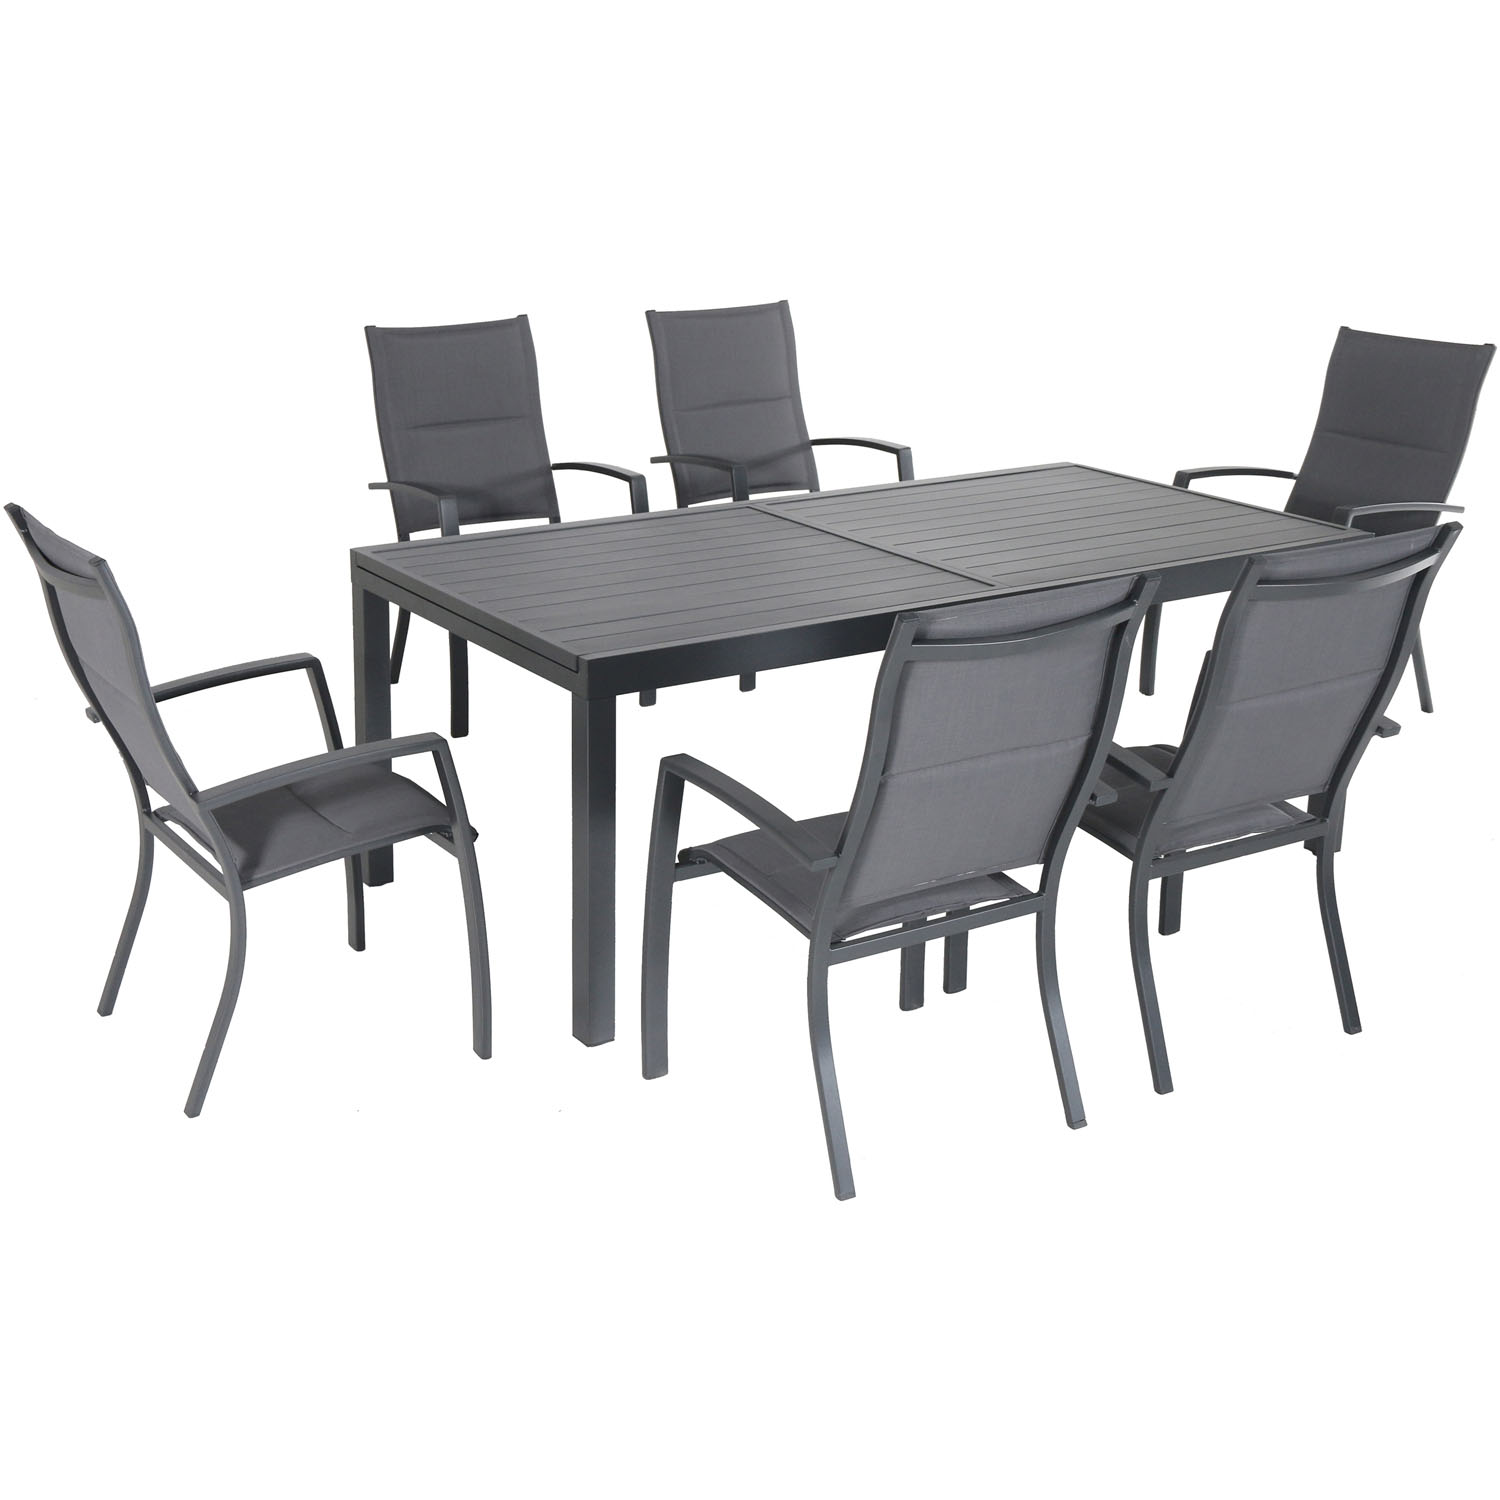 Hanover Naples 7-Piece Outdoor Dining Set w/ 6 Padded Sling Chairs in Gray and 40" x 118" Expandable Dining Table - image 1 of 16